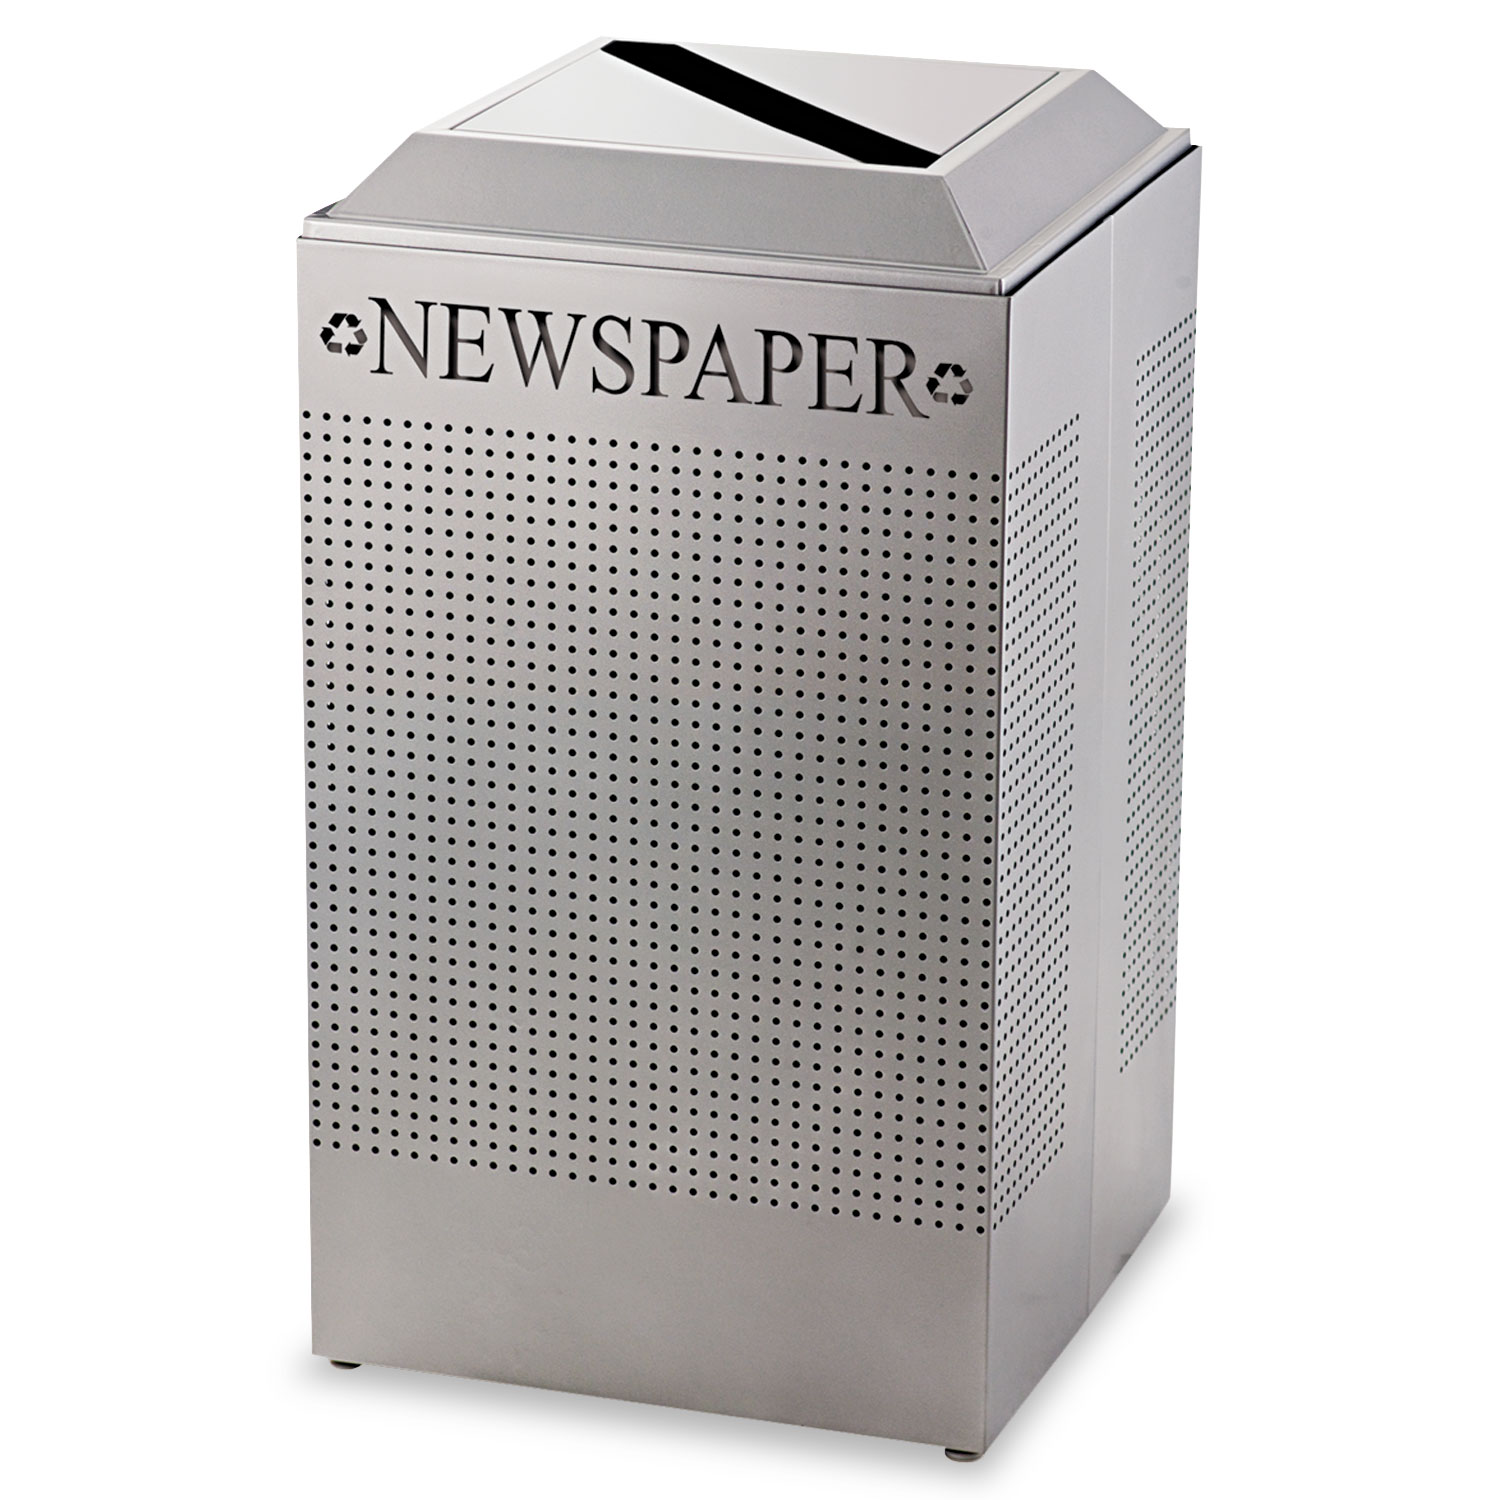 Silhouette Paper Recycling Receptacle, Square, Steel, 29gal, Silver Metallic